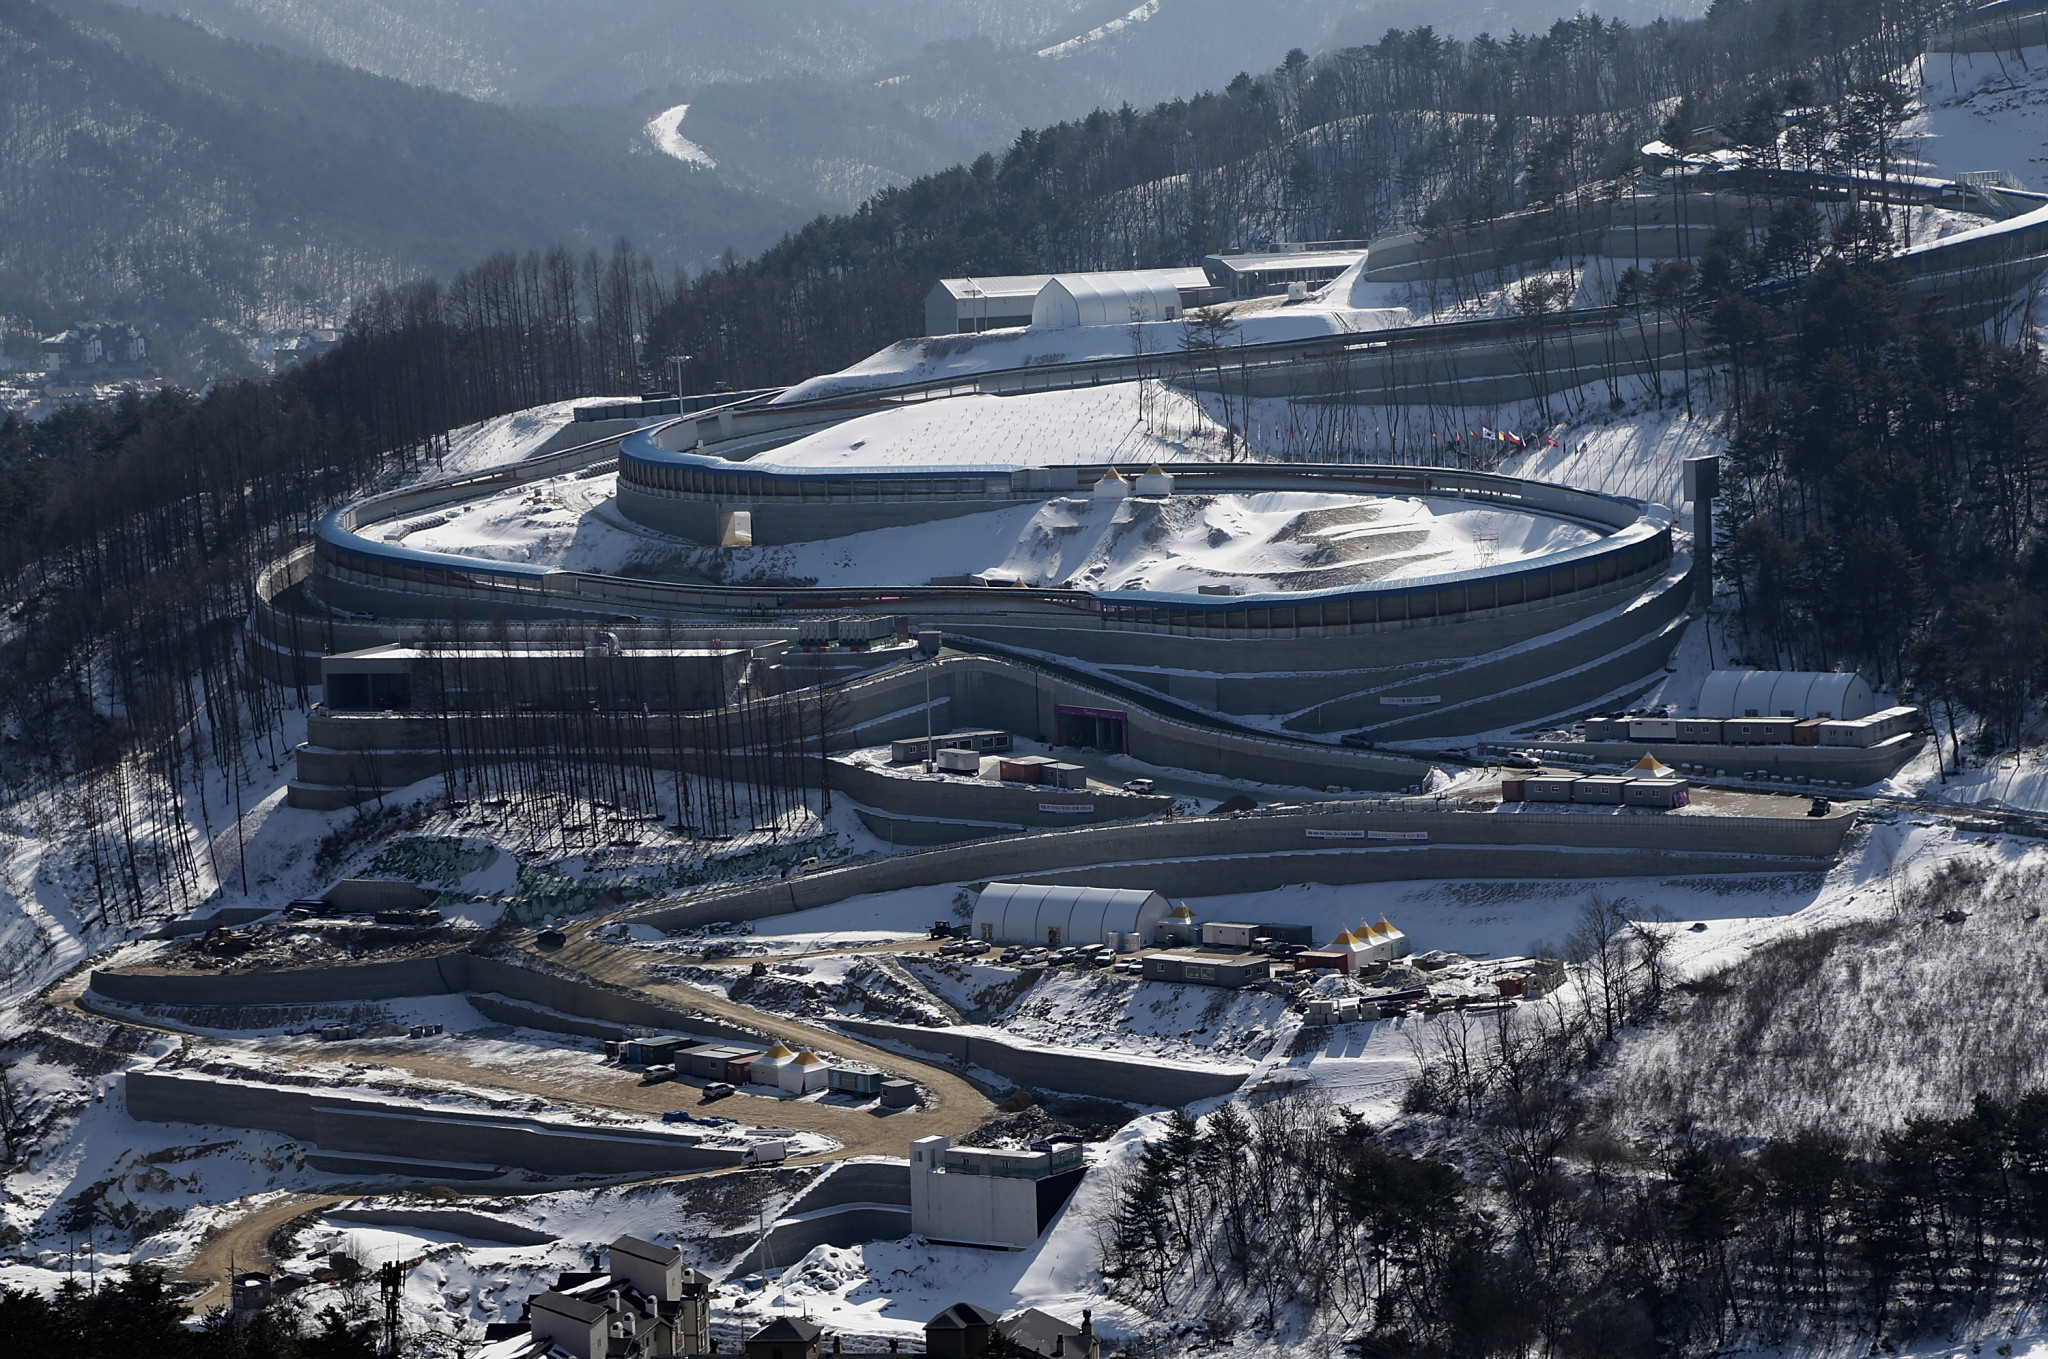 The group will attend Pyeongchang 2018 competitions during the Youth Camp ©Getty Images